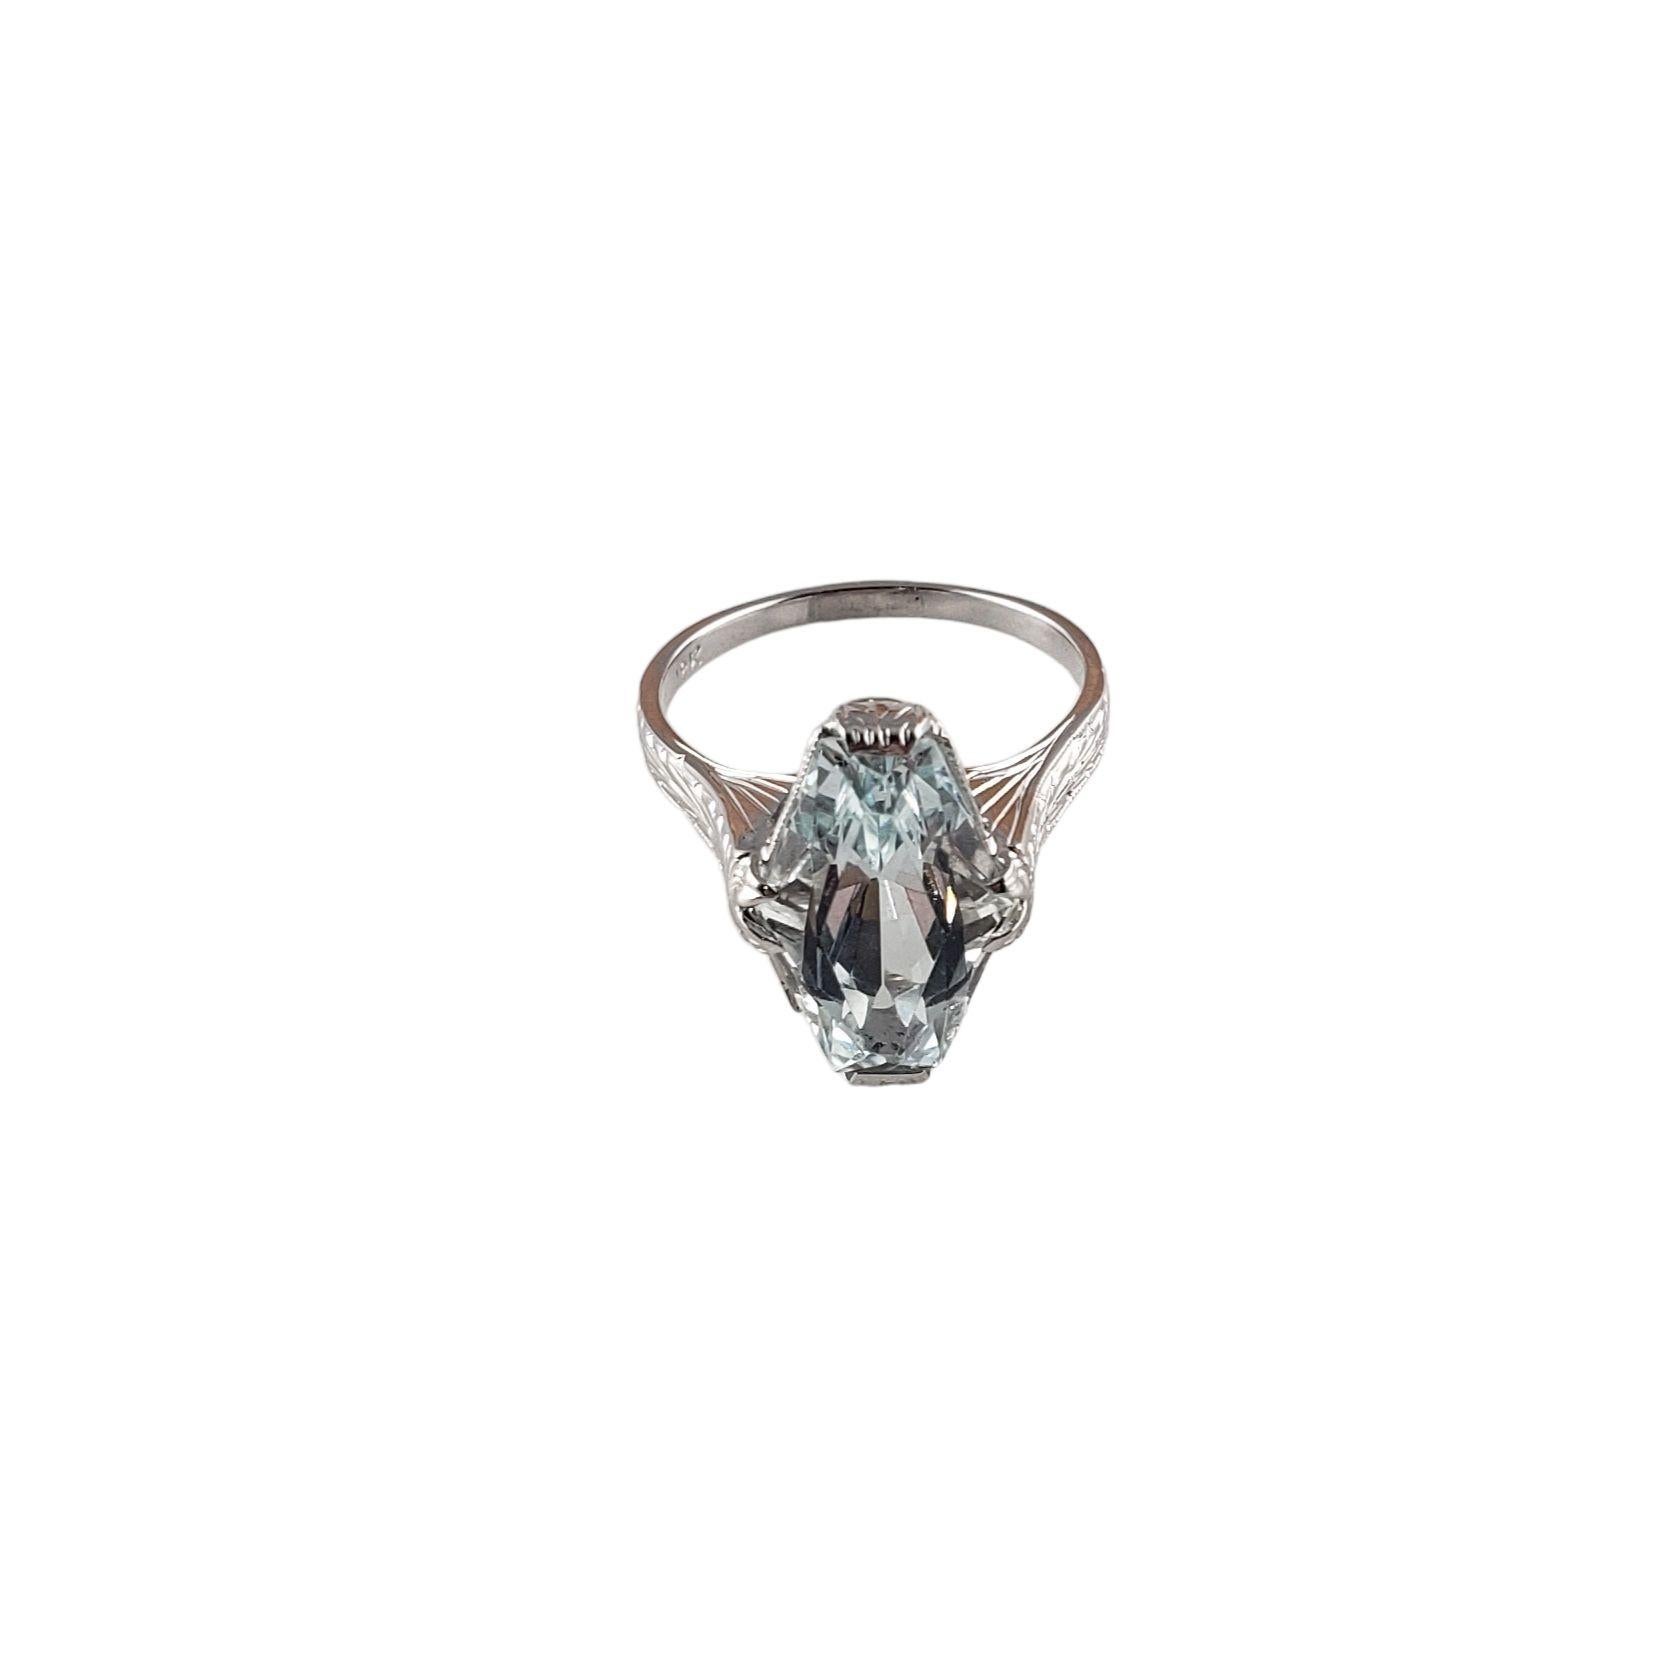 18 Karat White Gold Aquamarine Ring Size 5.5 #14216 In Good Condition For Sale In Washington Depot, CT